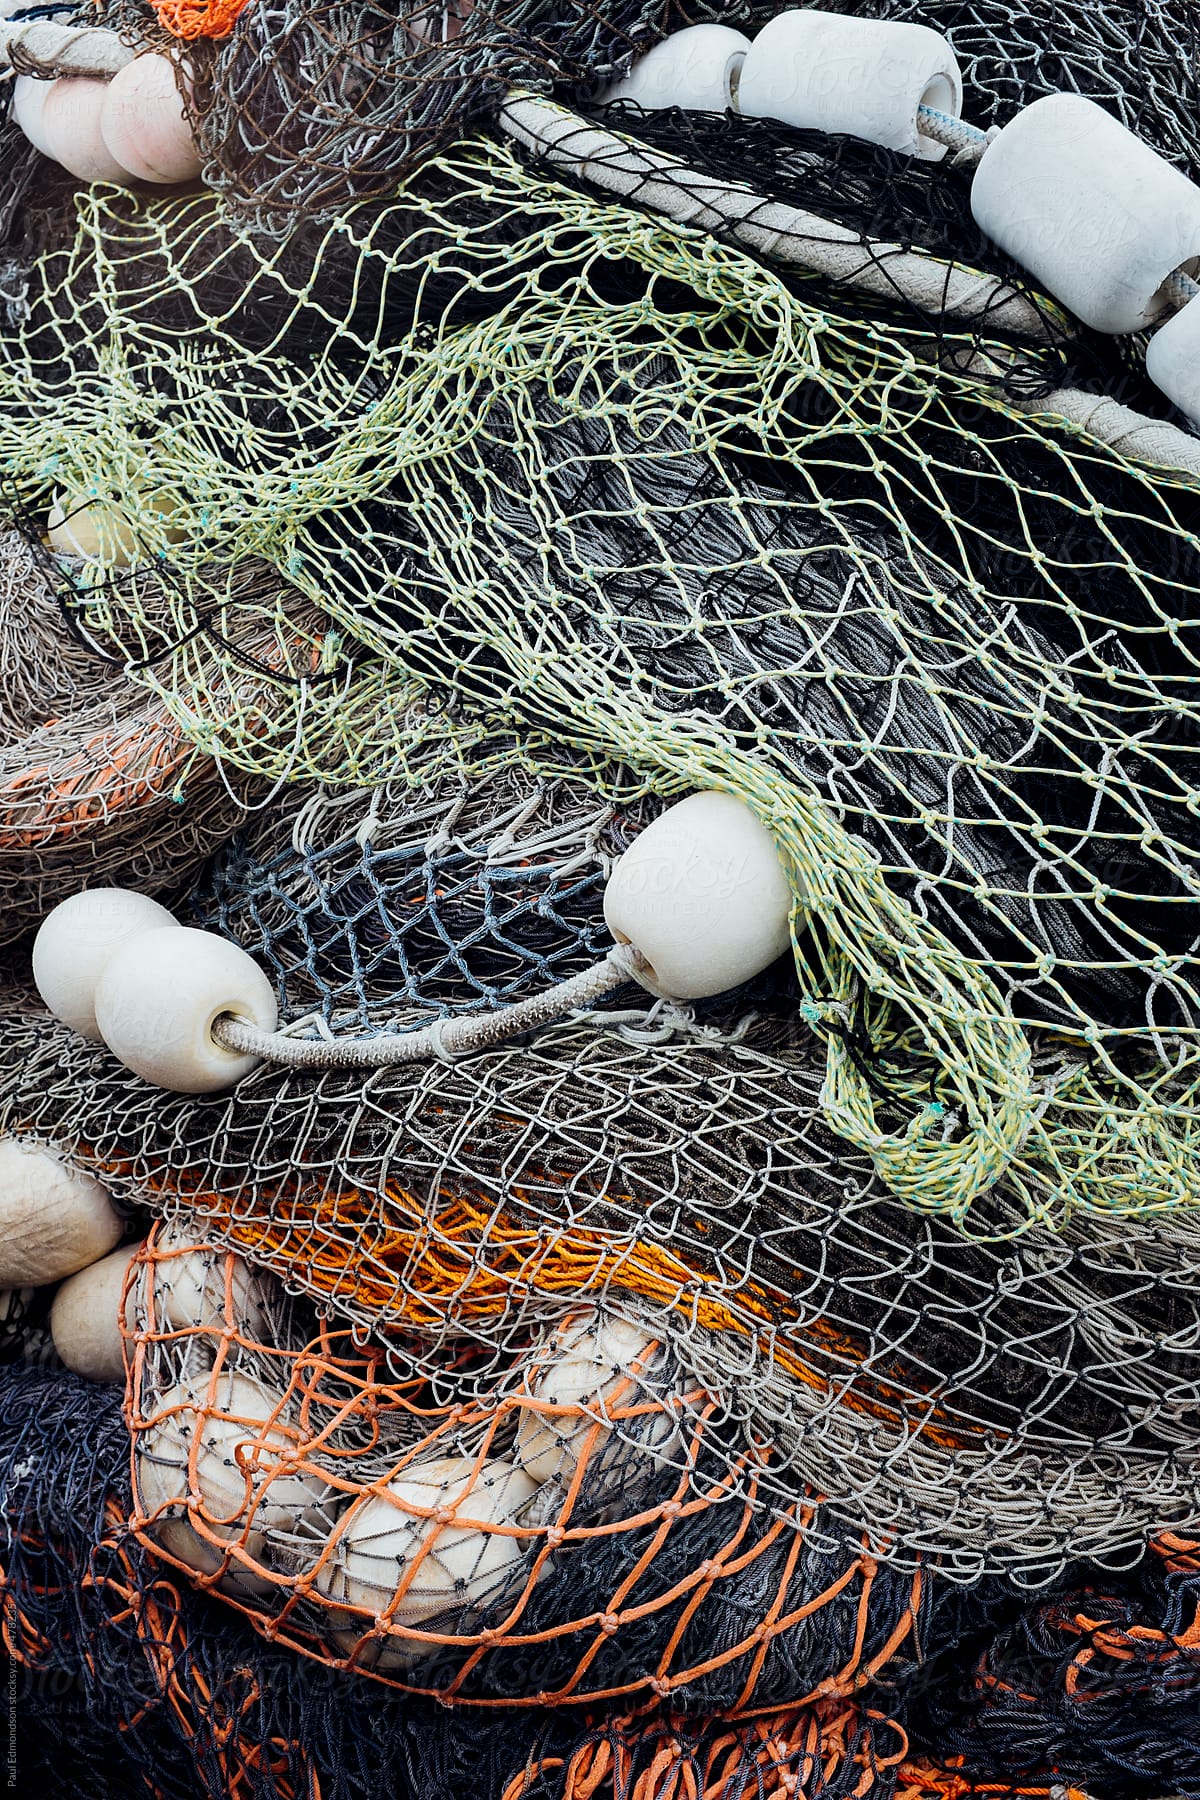 Pile Of Commercial Fishing Nets by Stocksy Contributor Rialto